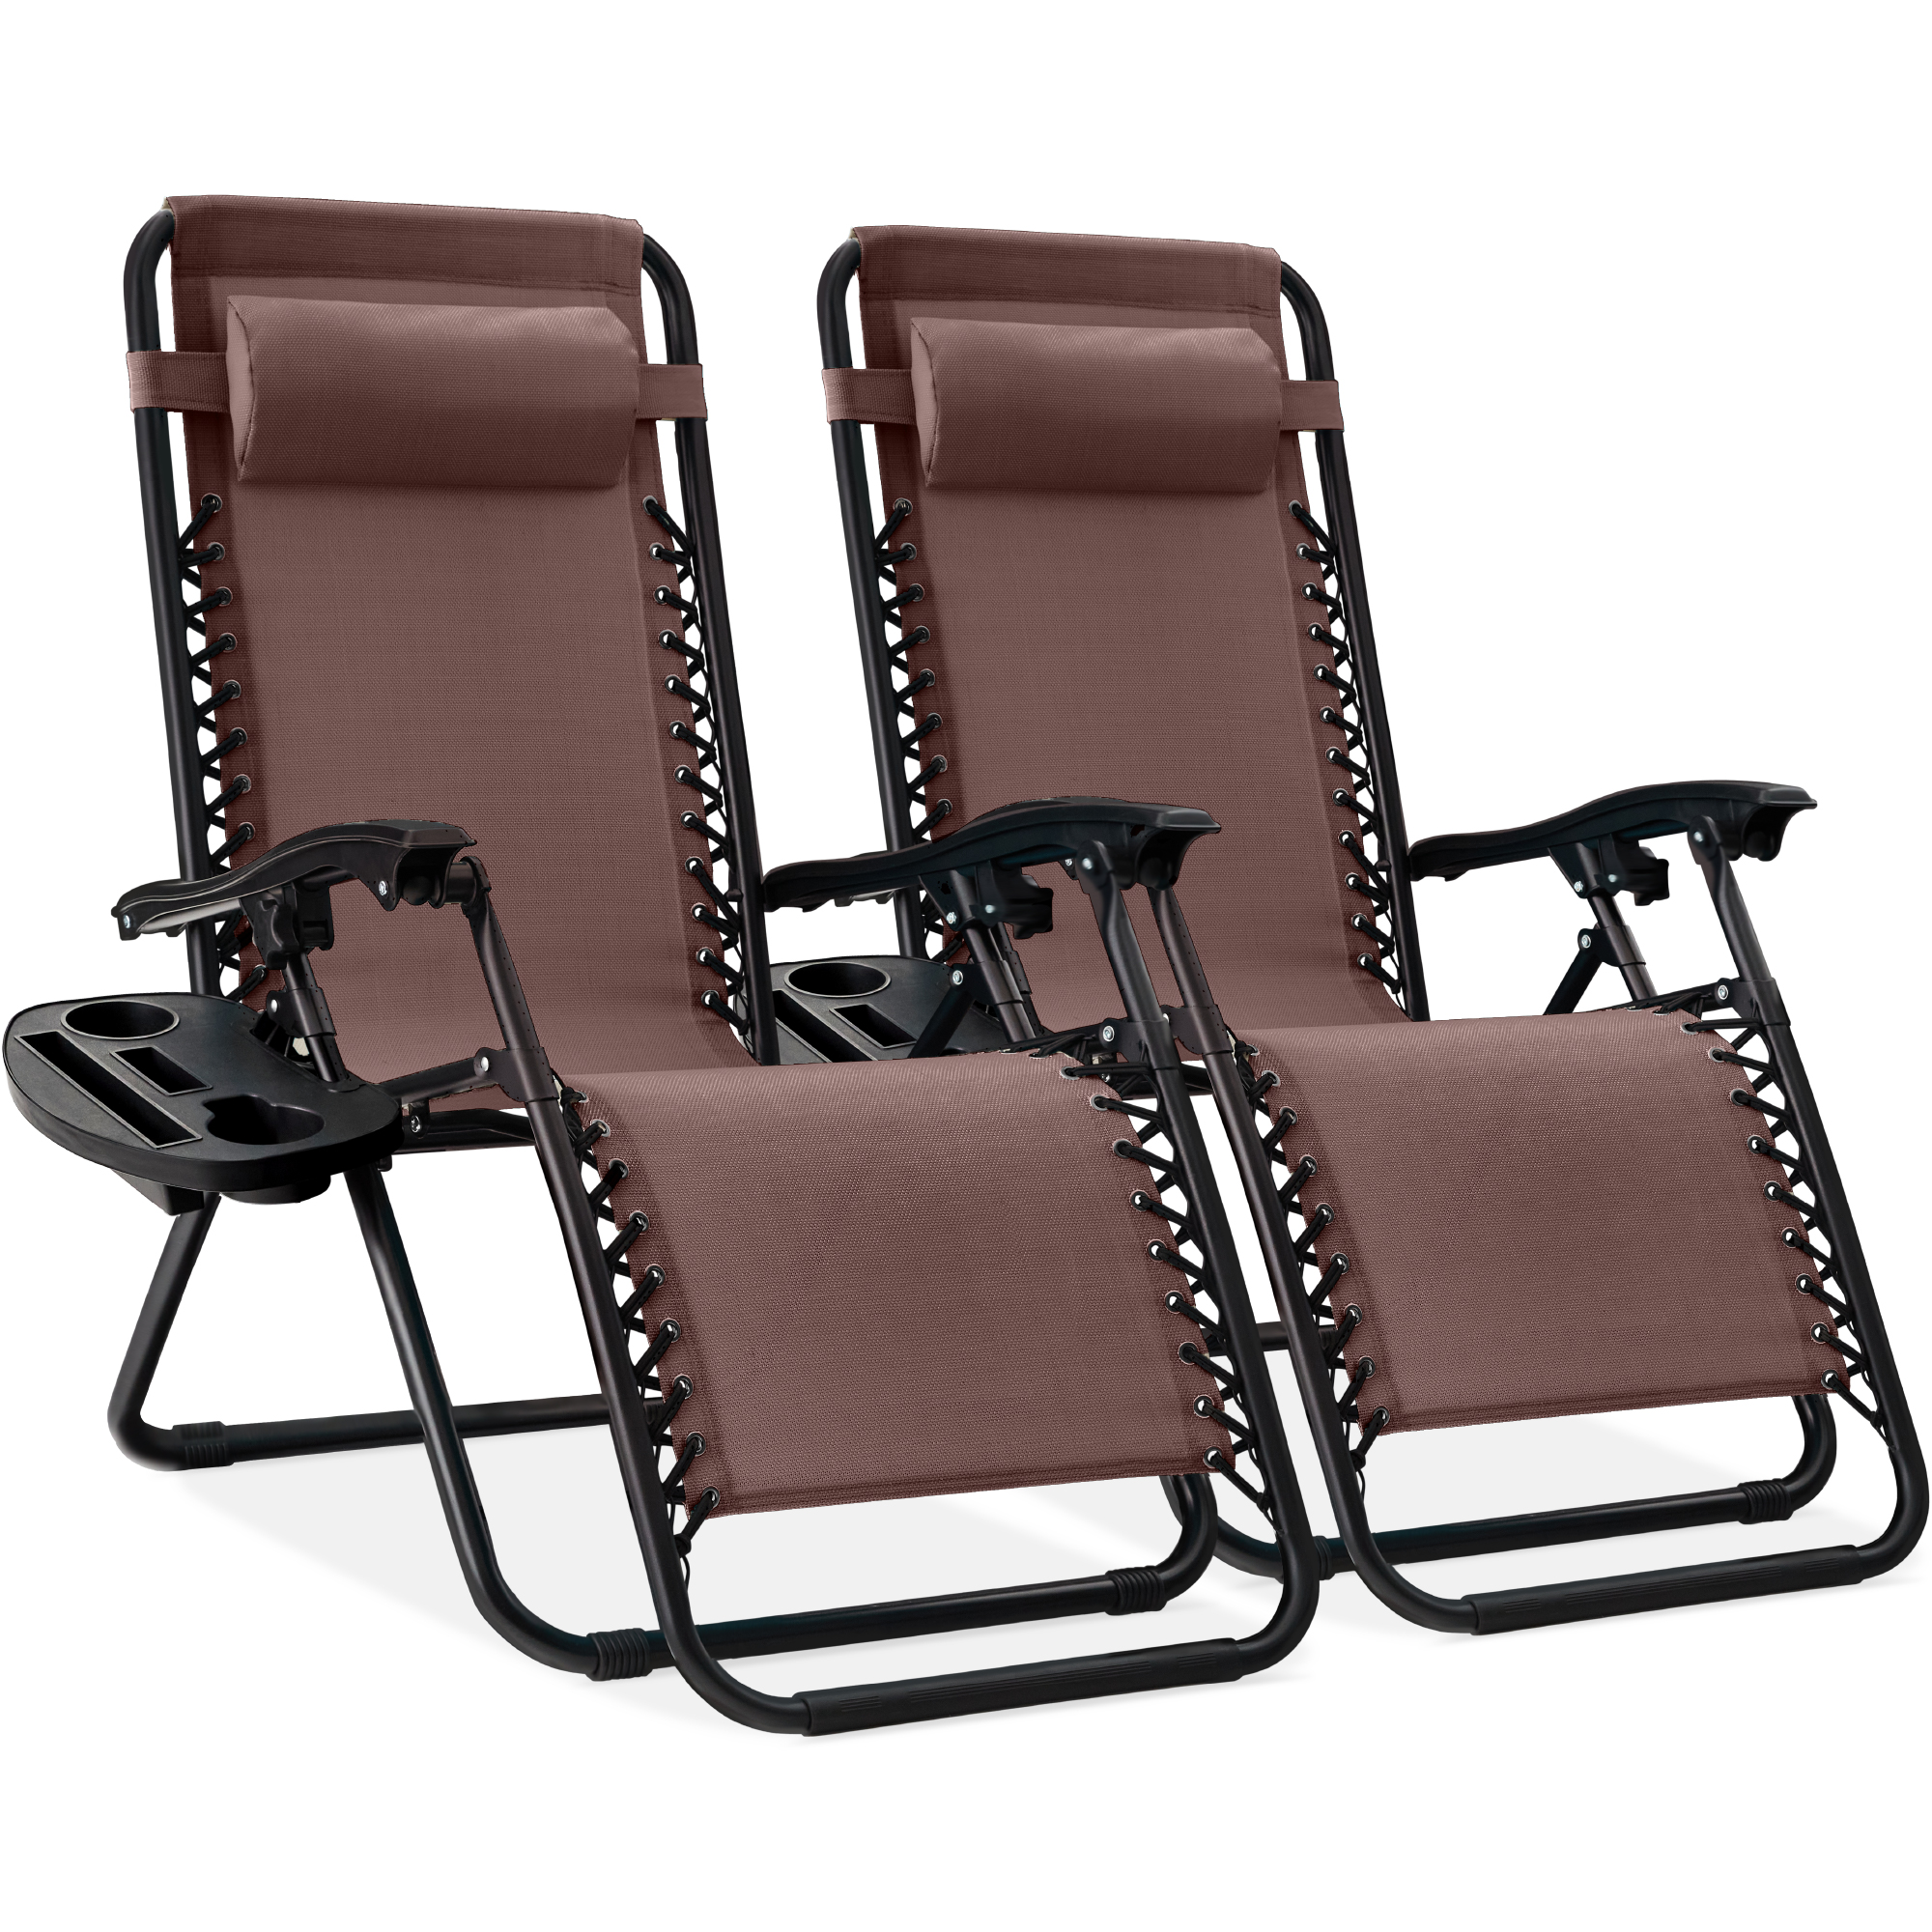 Best Choice Products Set of 2 Zero Gravity Lounge Chair Recliners for Patio, Pool w/ Cup Holder Tray - Brown - image 1 of 8